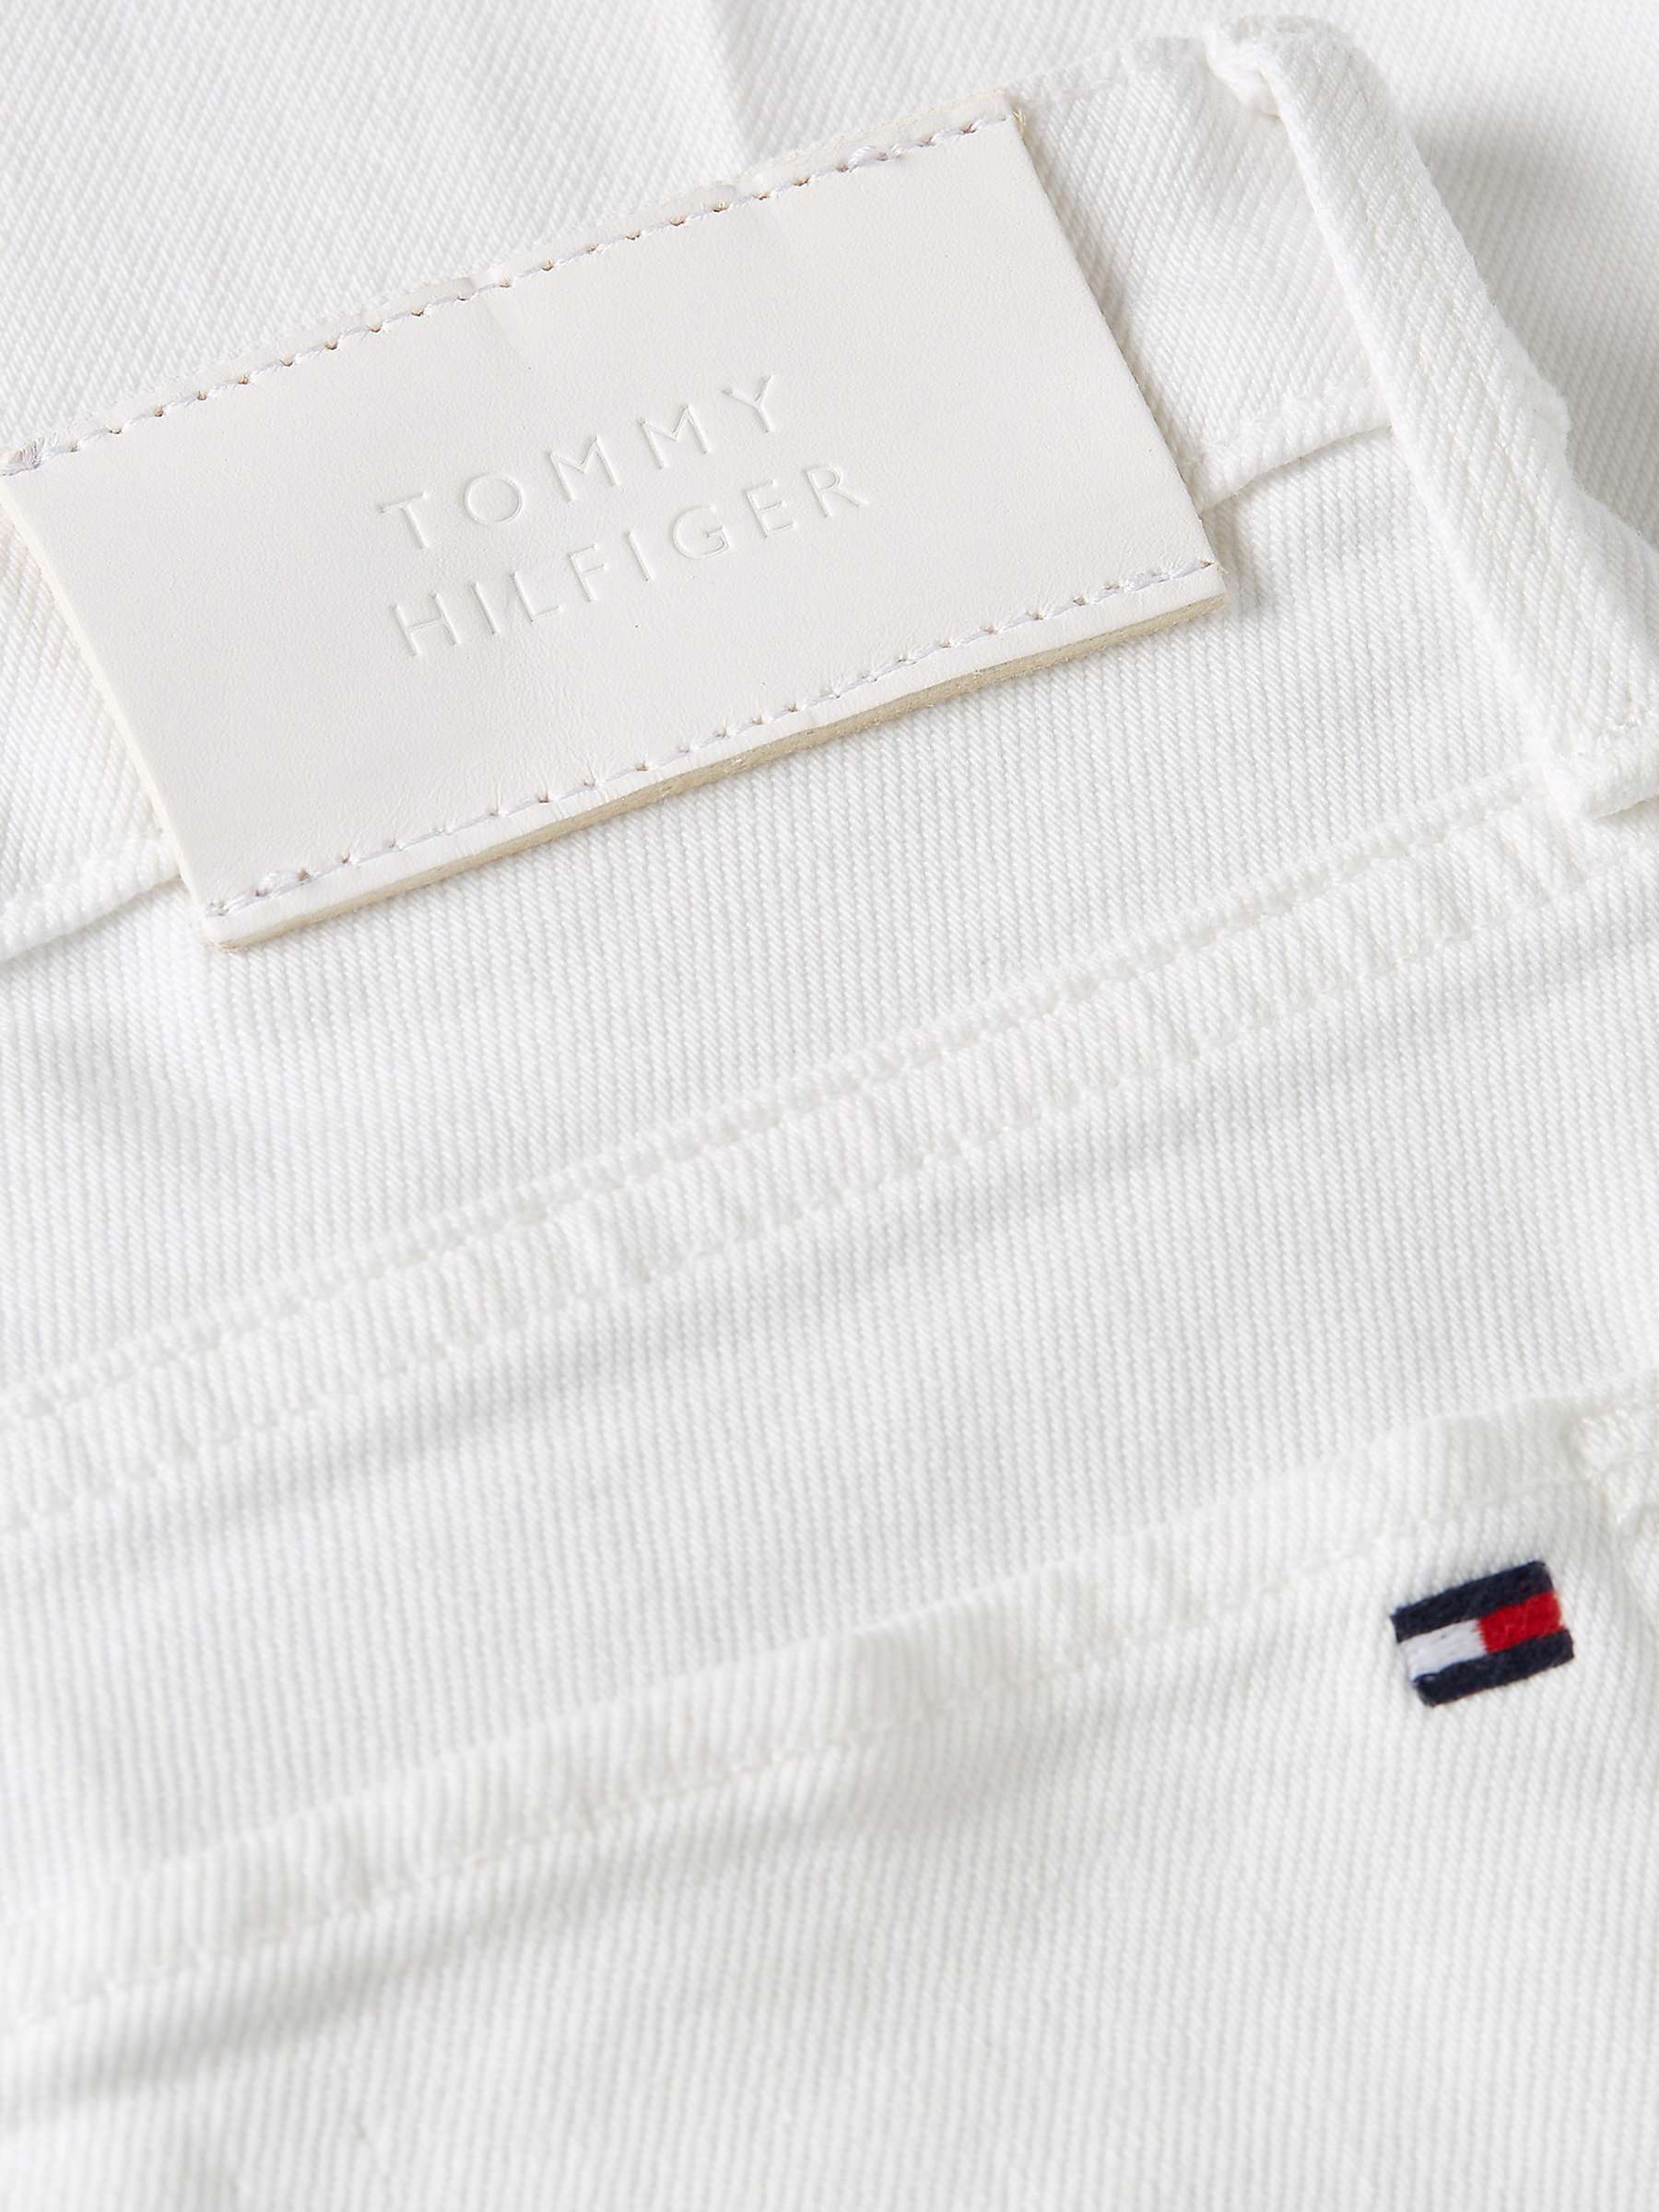 Buy Tommy Hilfiger Bootcut Jeans, White Online at johnlewis.com